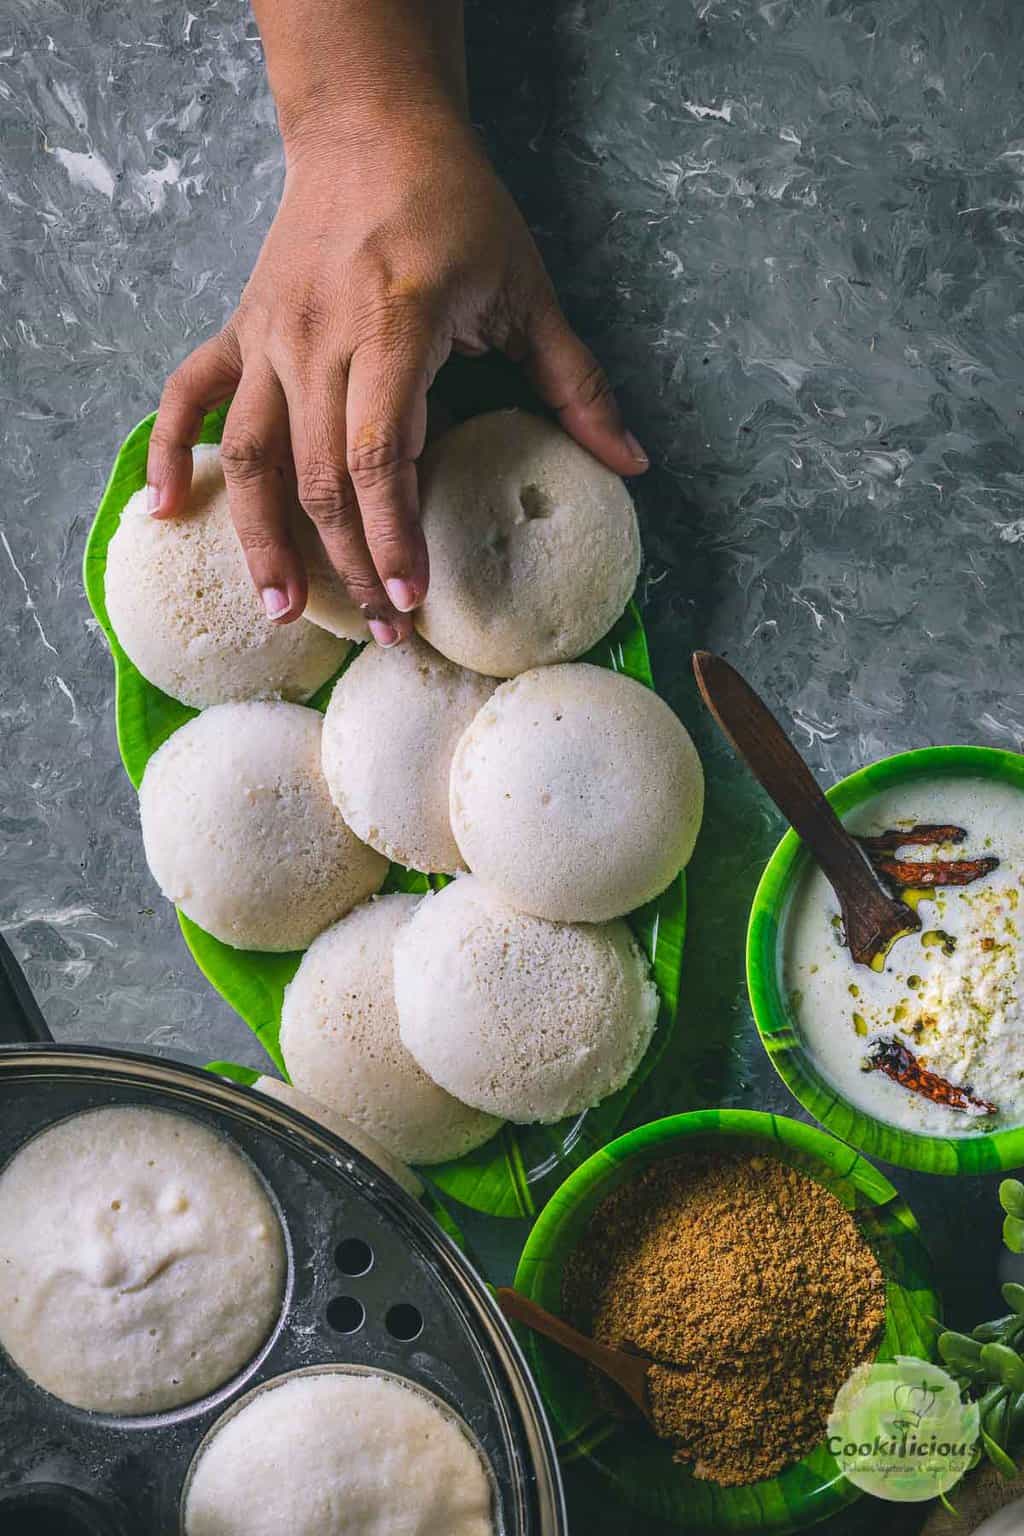 a plate full of white steamed idlis and one hand reaching out to pick one